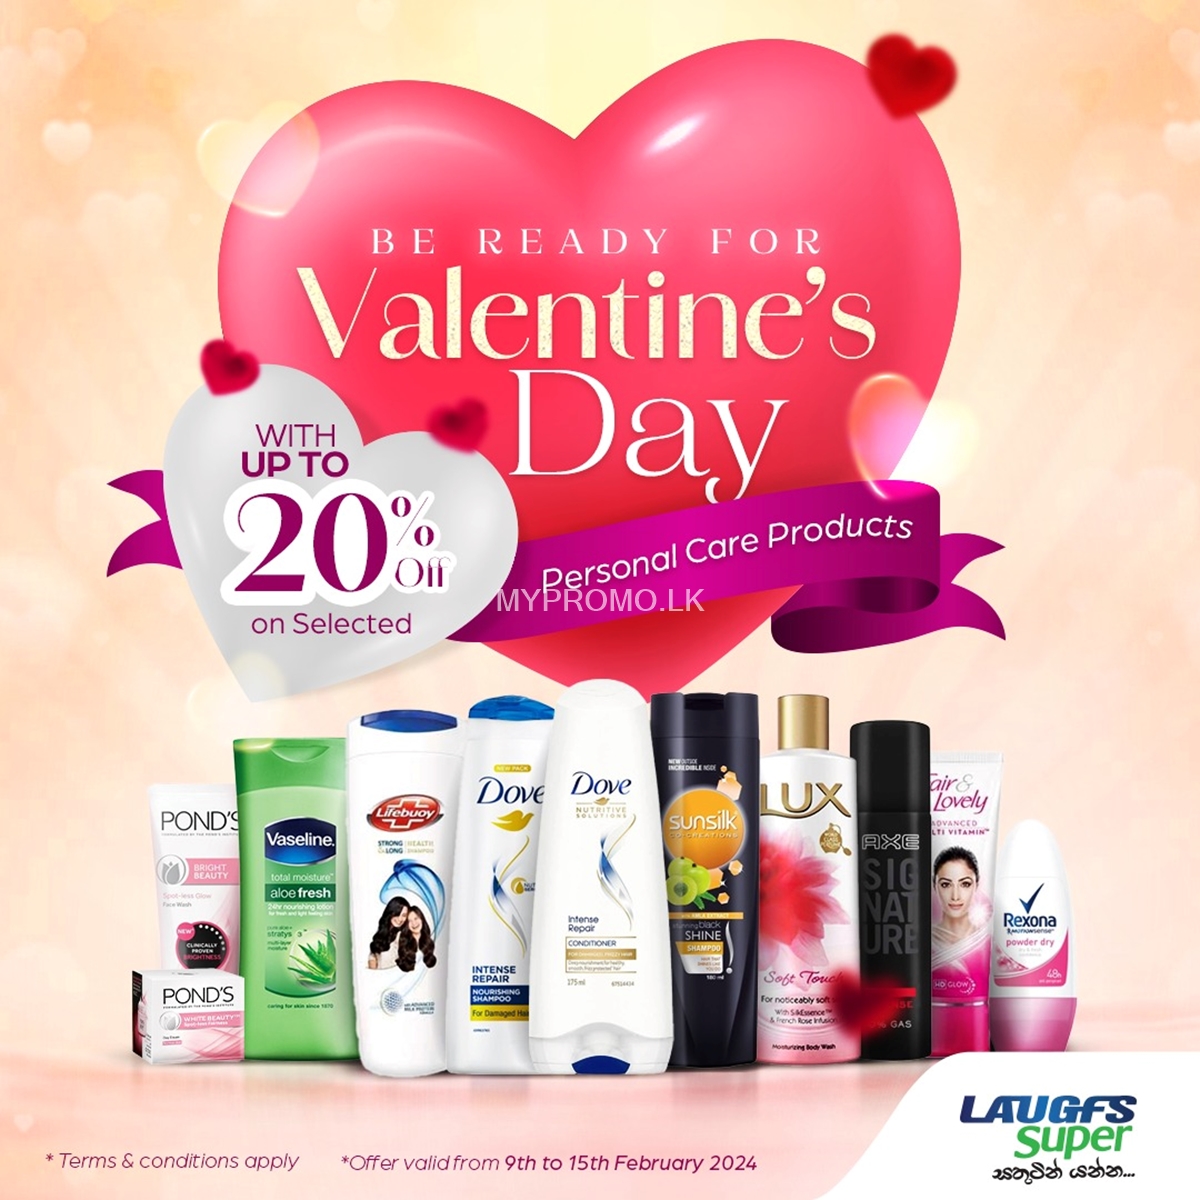 Enjoy up to 20% off on your favourite personal care products this Valentine's season at LAUGFS Supermarket